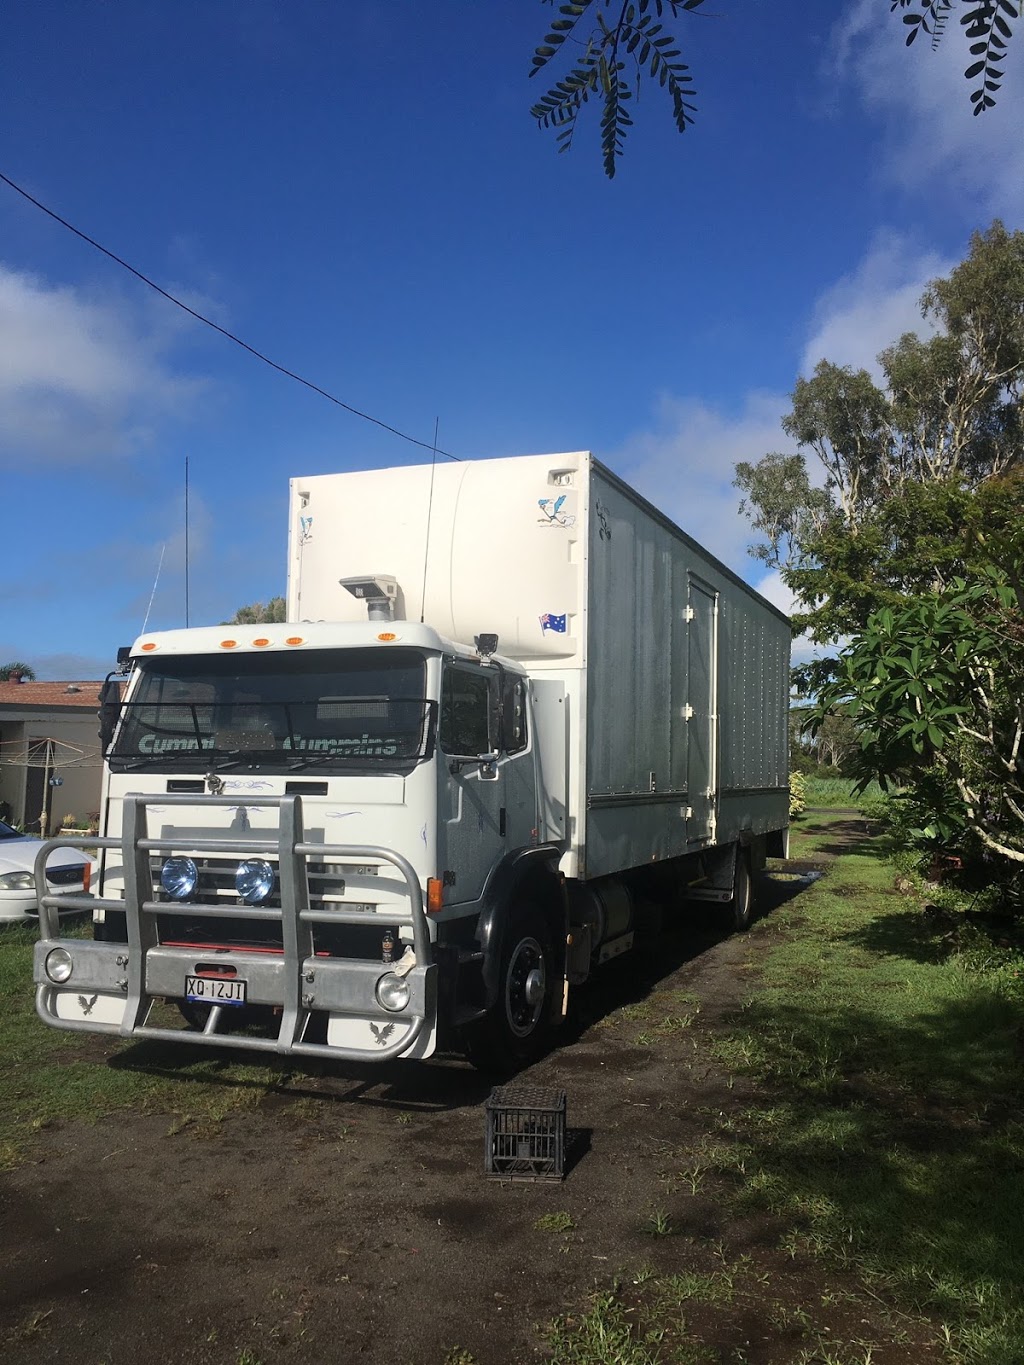 Dunford Removals Bundaberg | moving company | 56 Cattermull Ave, Qunaba QLD 4670, Australia | 1800622985 OR +61 1800 622 985